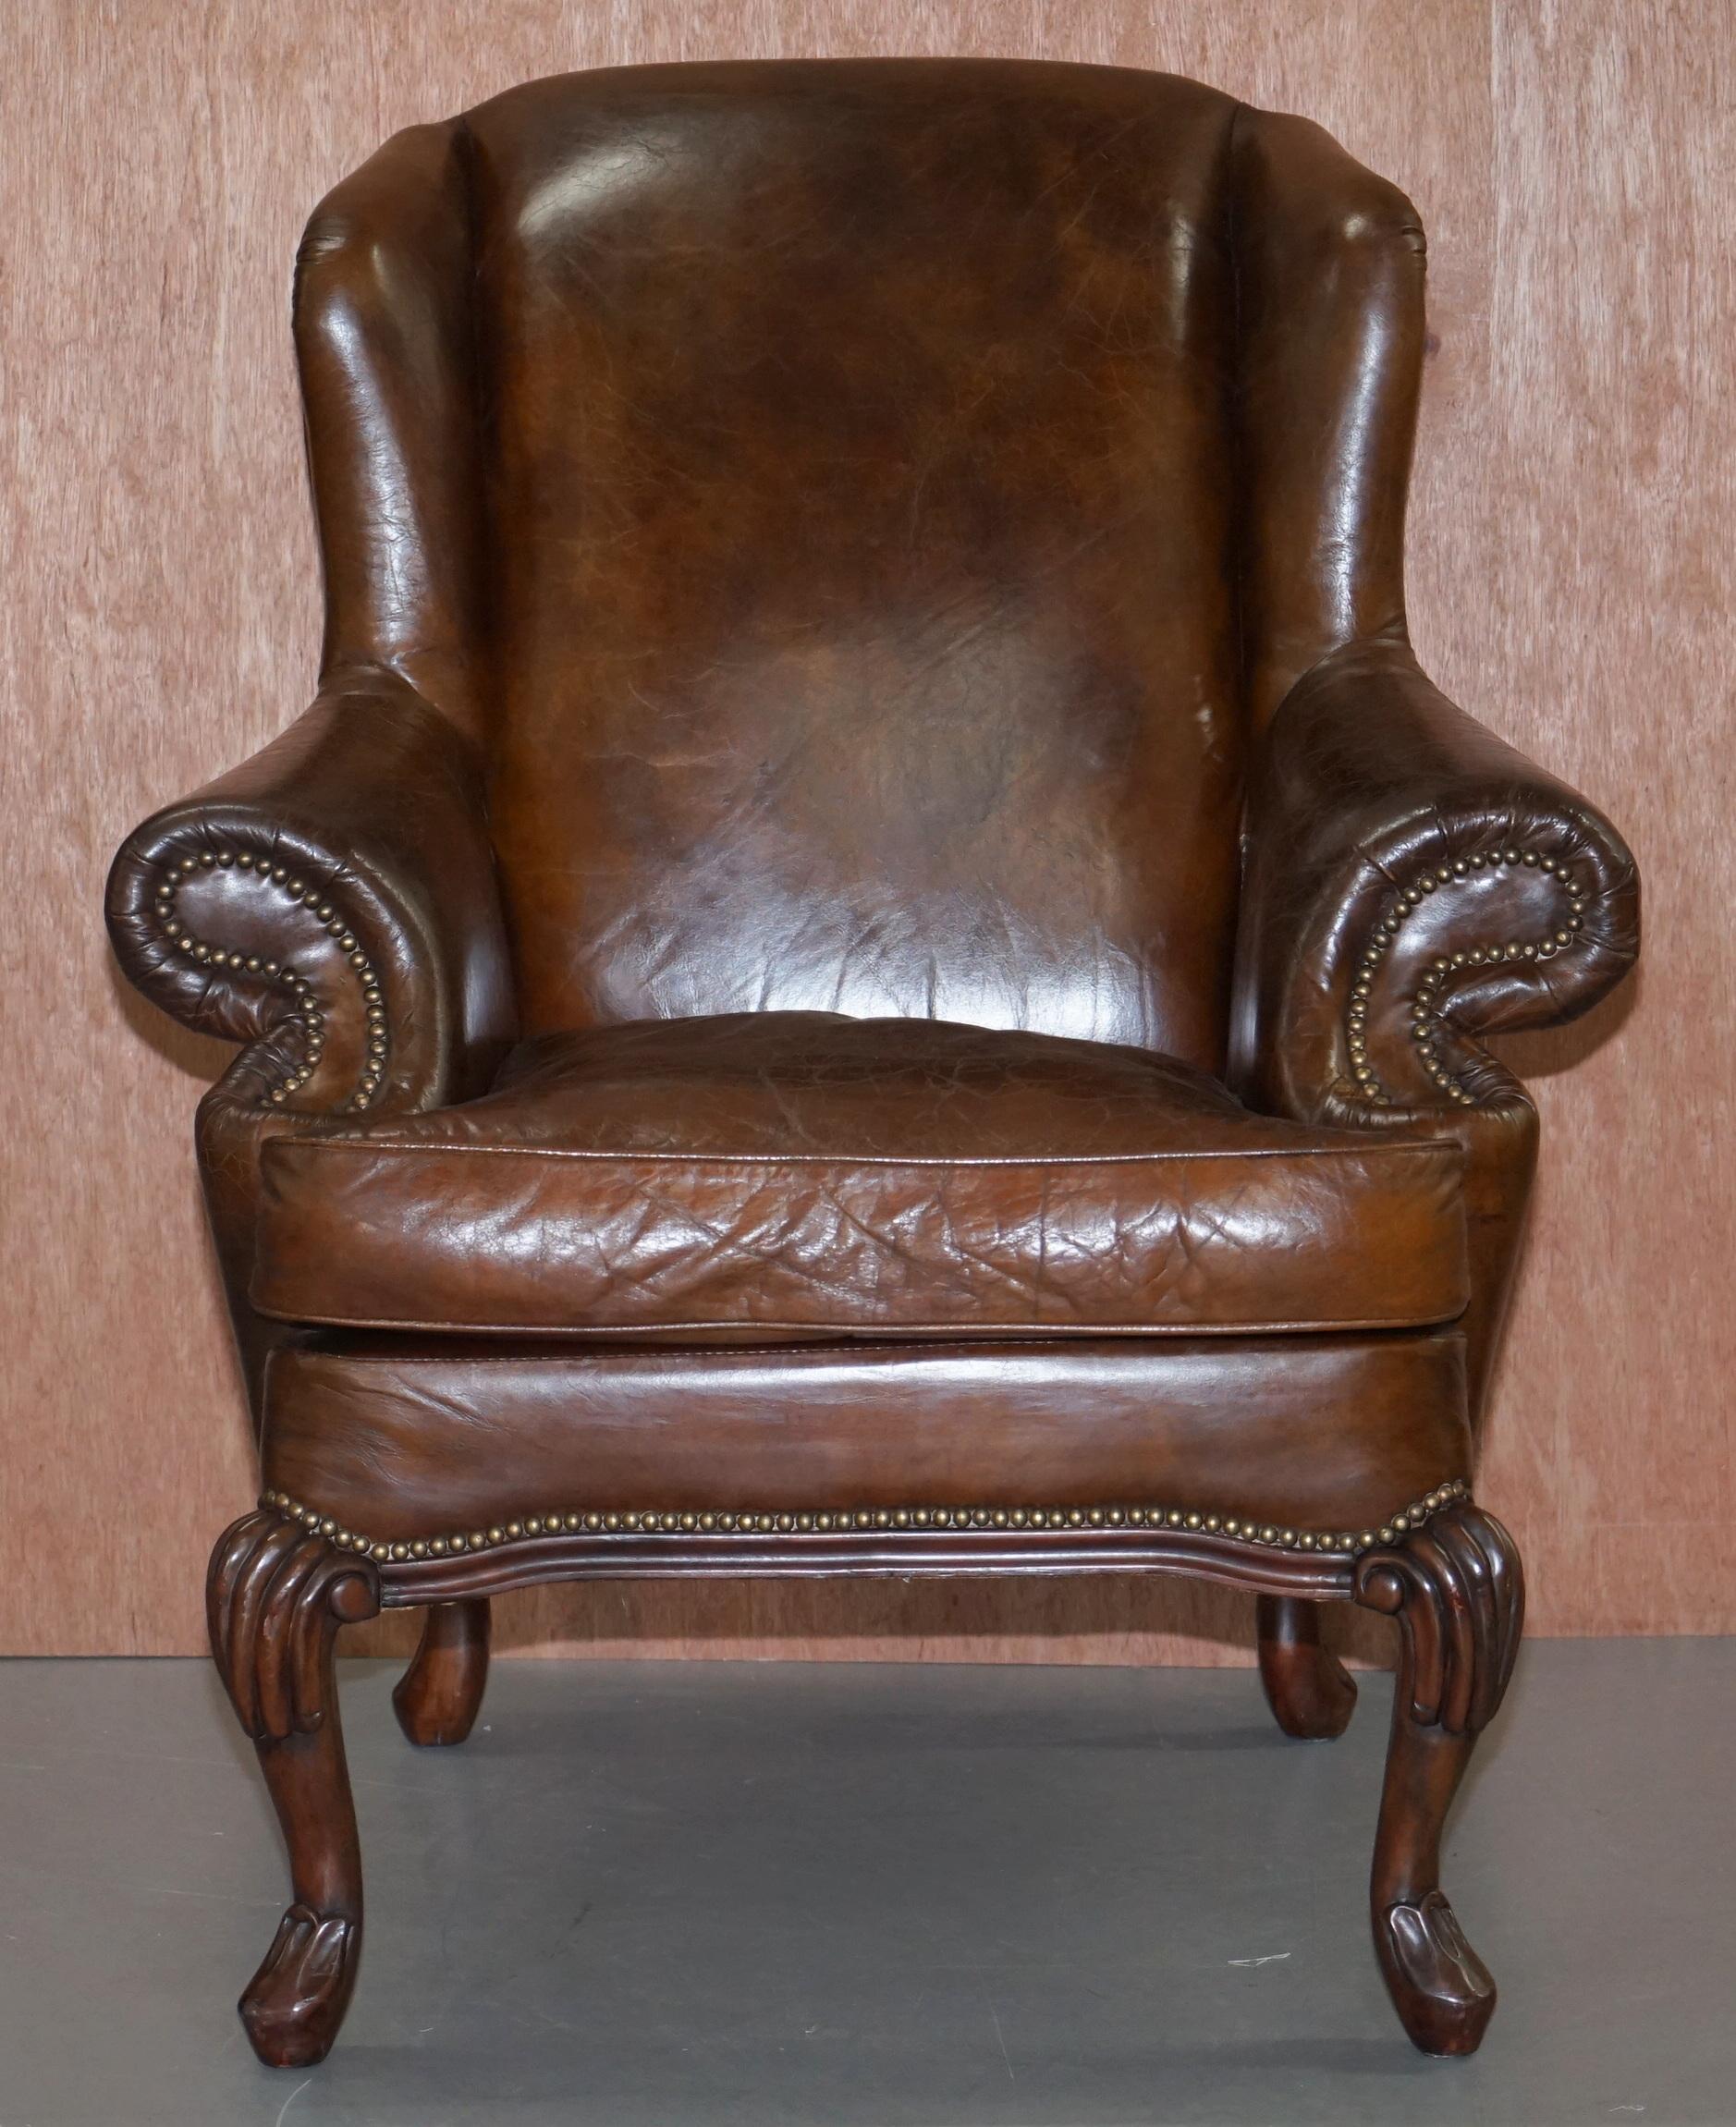 We are delighted to offer for sale this lovely heritage brown distressed leather wingback armchair

A very decorative comfortable and good looking chair, the leather is heritage leather so its designed to look 100 years old from new. The timber is